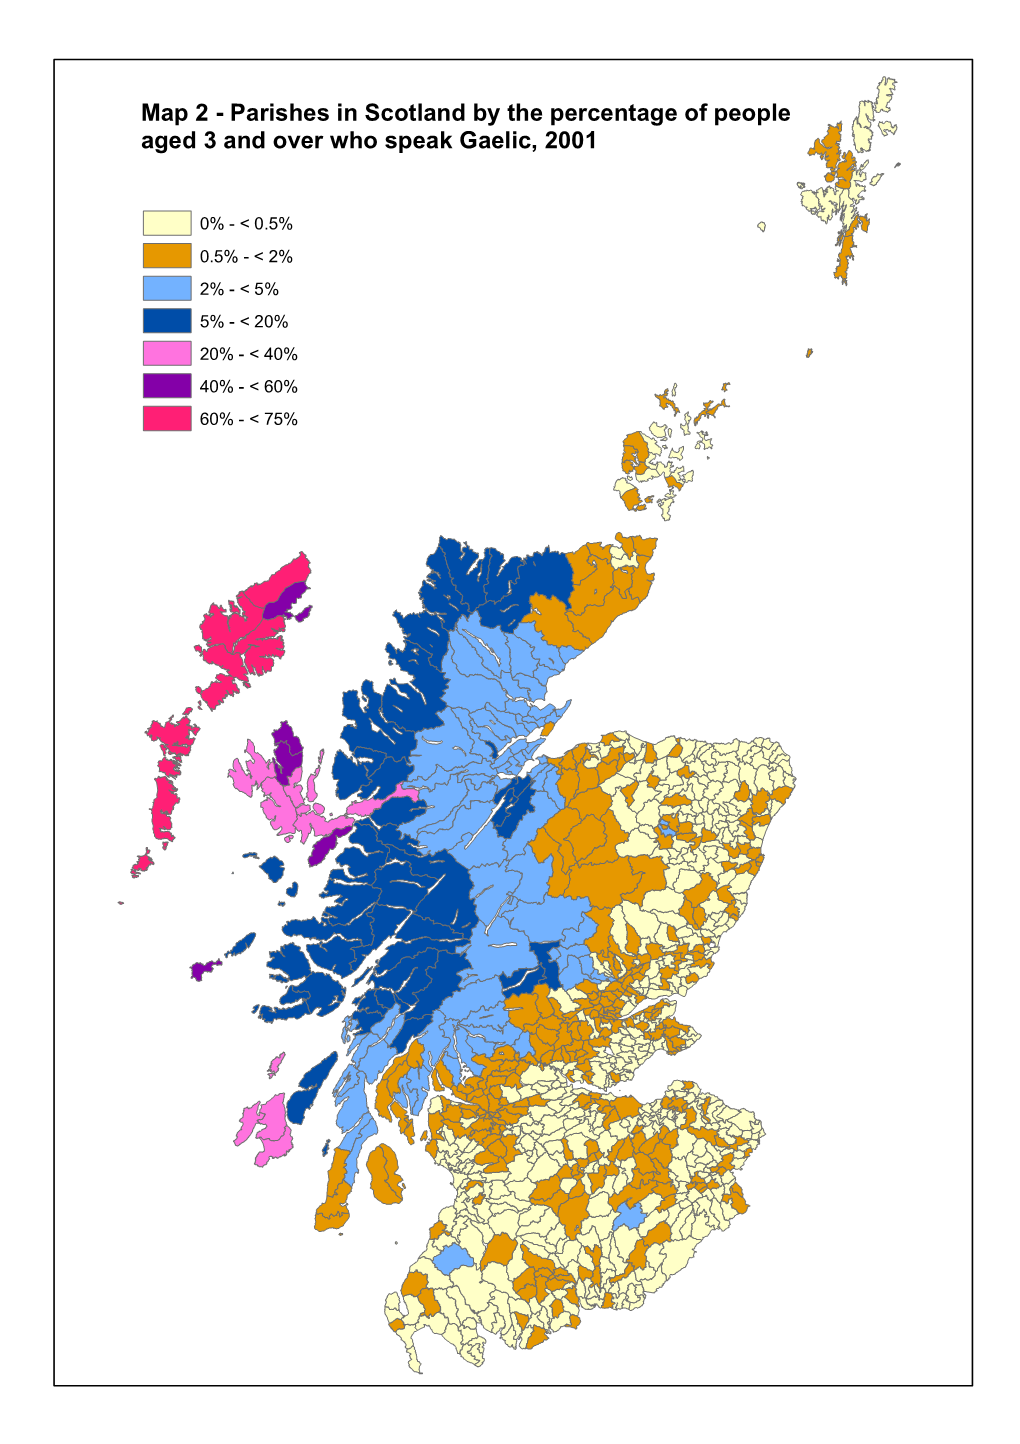 Map 2 - Parishes in Scotland by the Percentage of People Aged 3 and Over Who Speak Gaelic, 2001